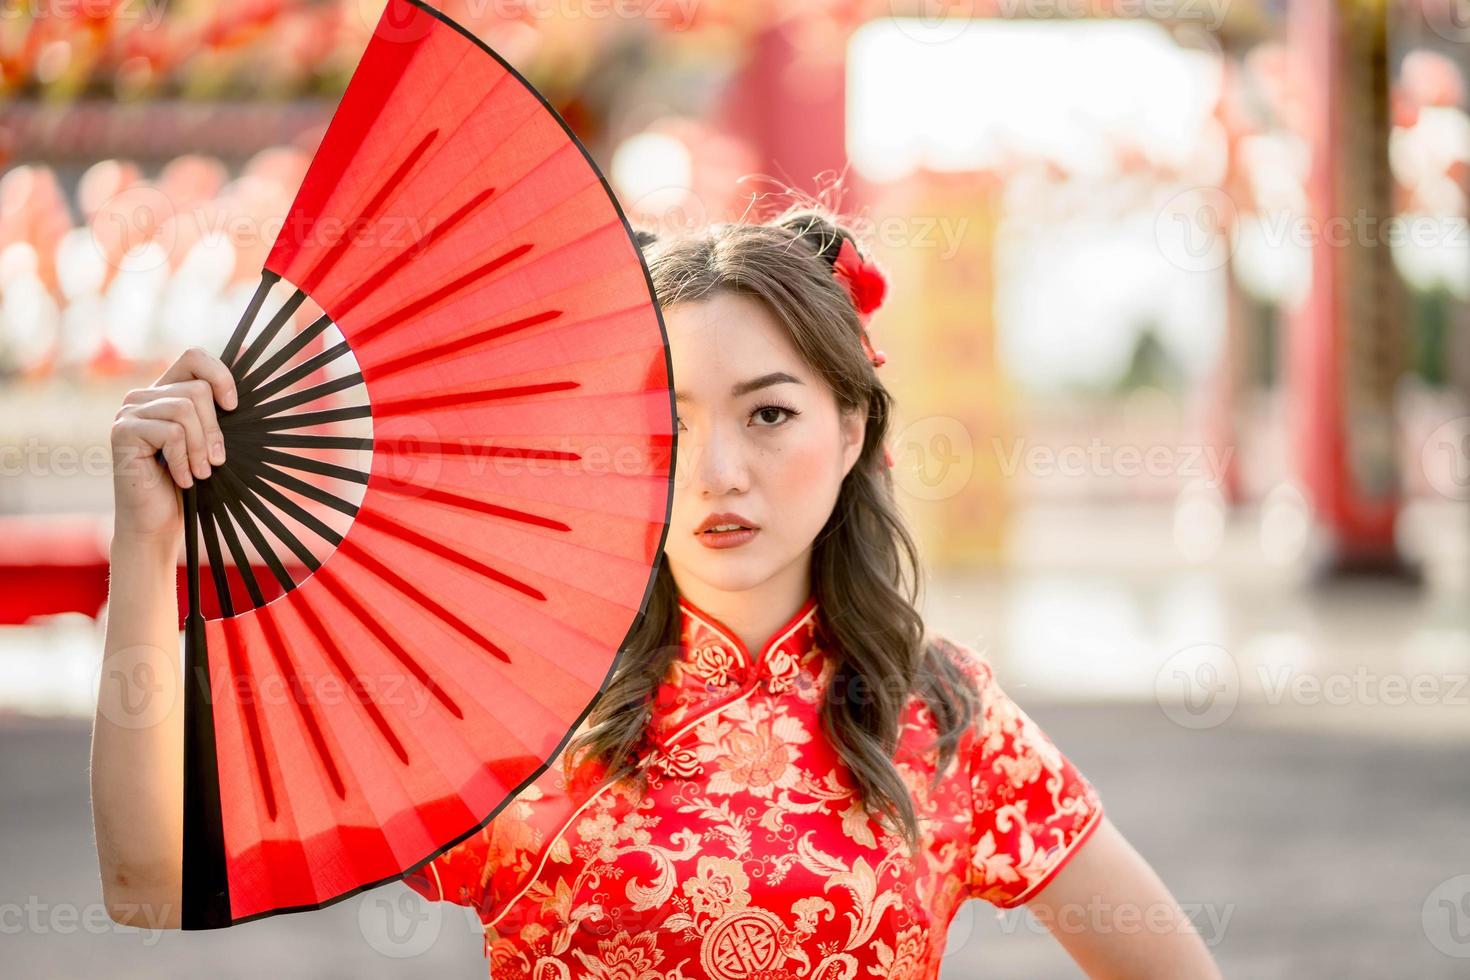 Happy Lunar Chinese new year festival. Young lady wearing traditional cheongsam qipao costume holding fan in Chinese Buddhist temple. photo